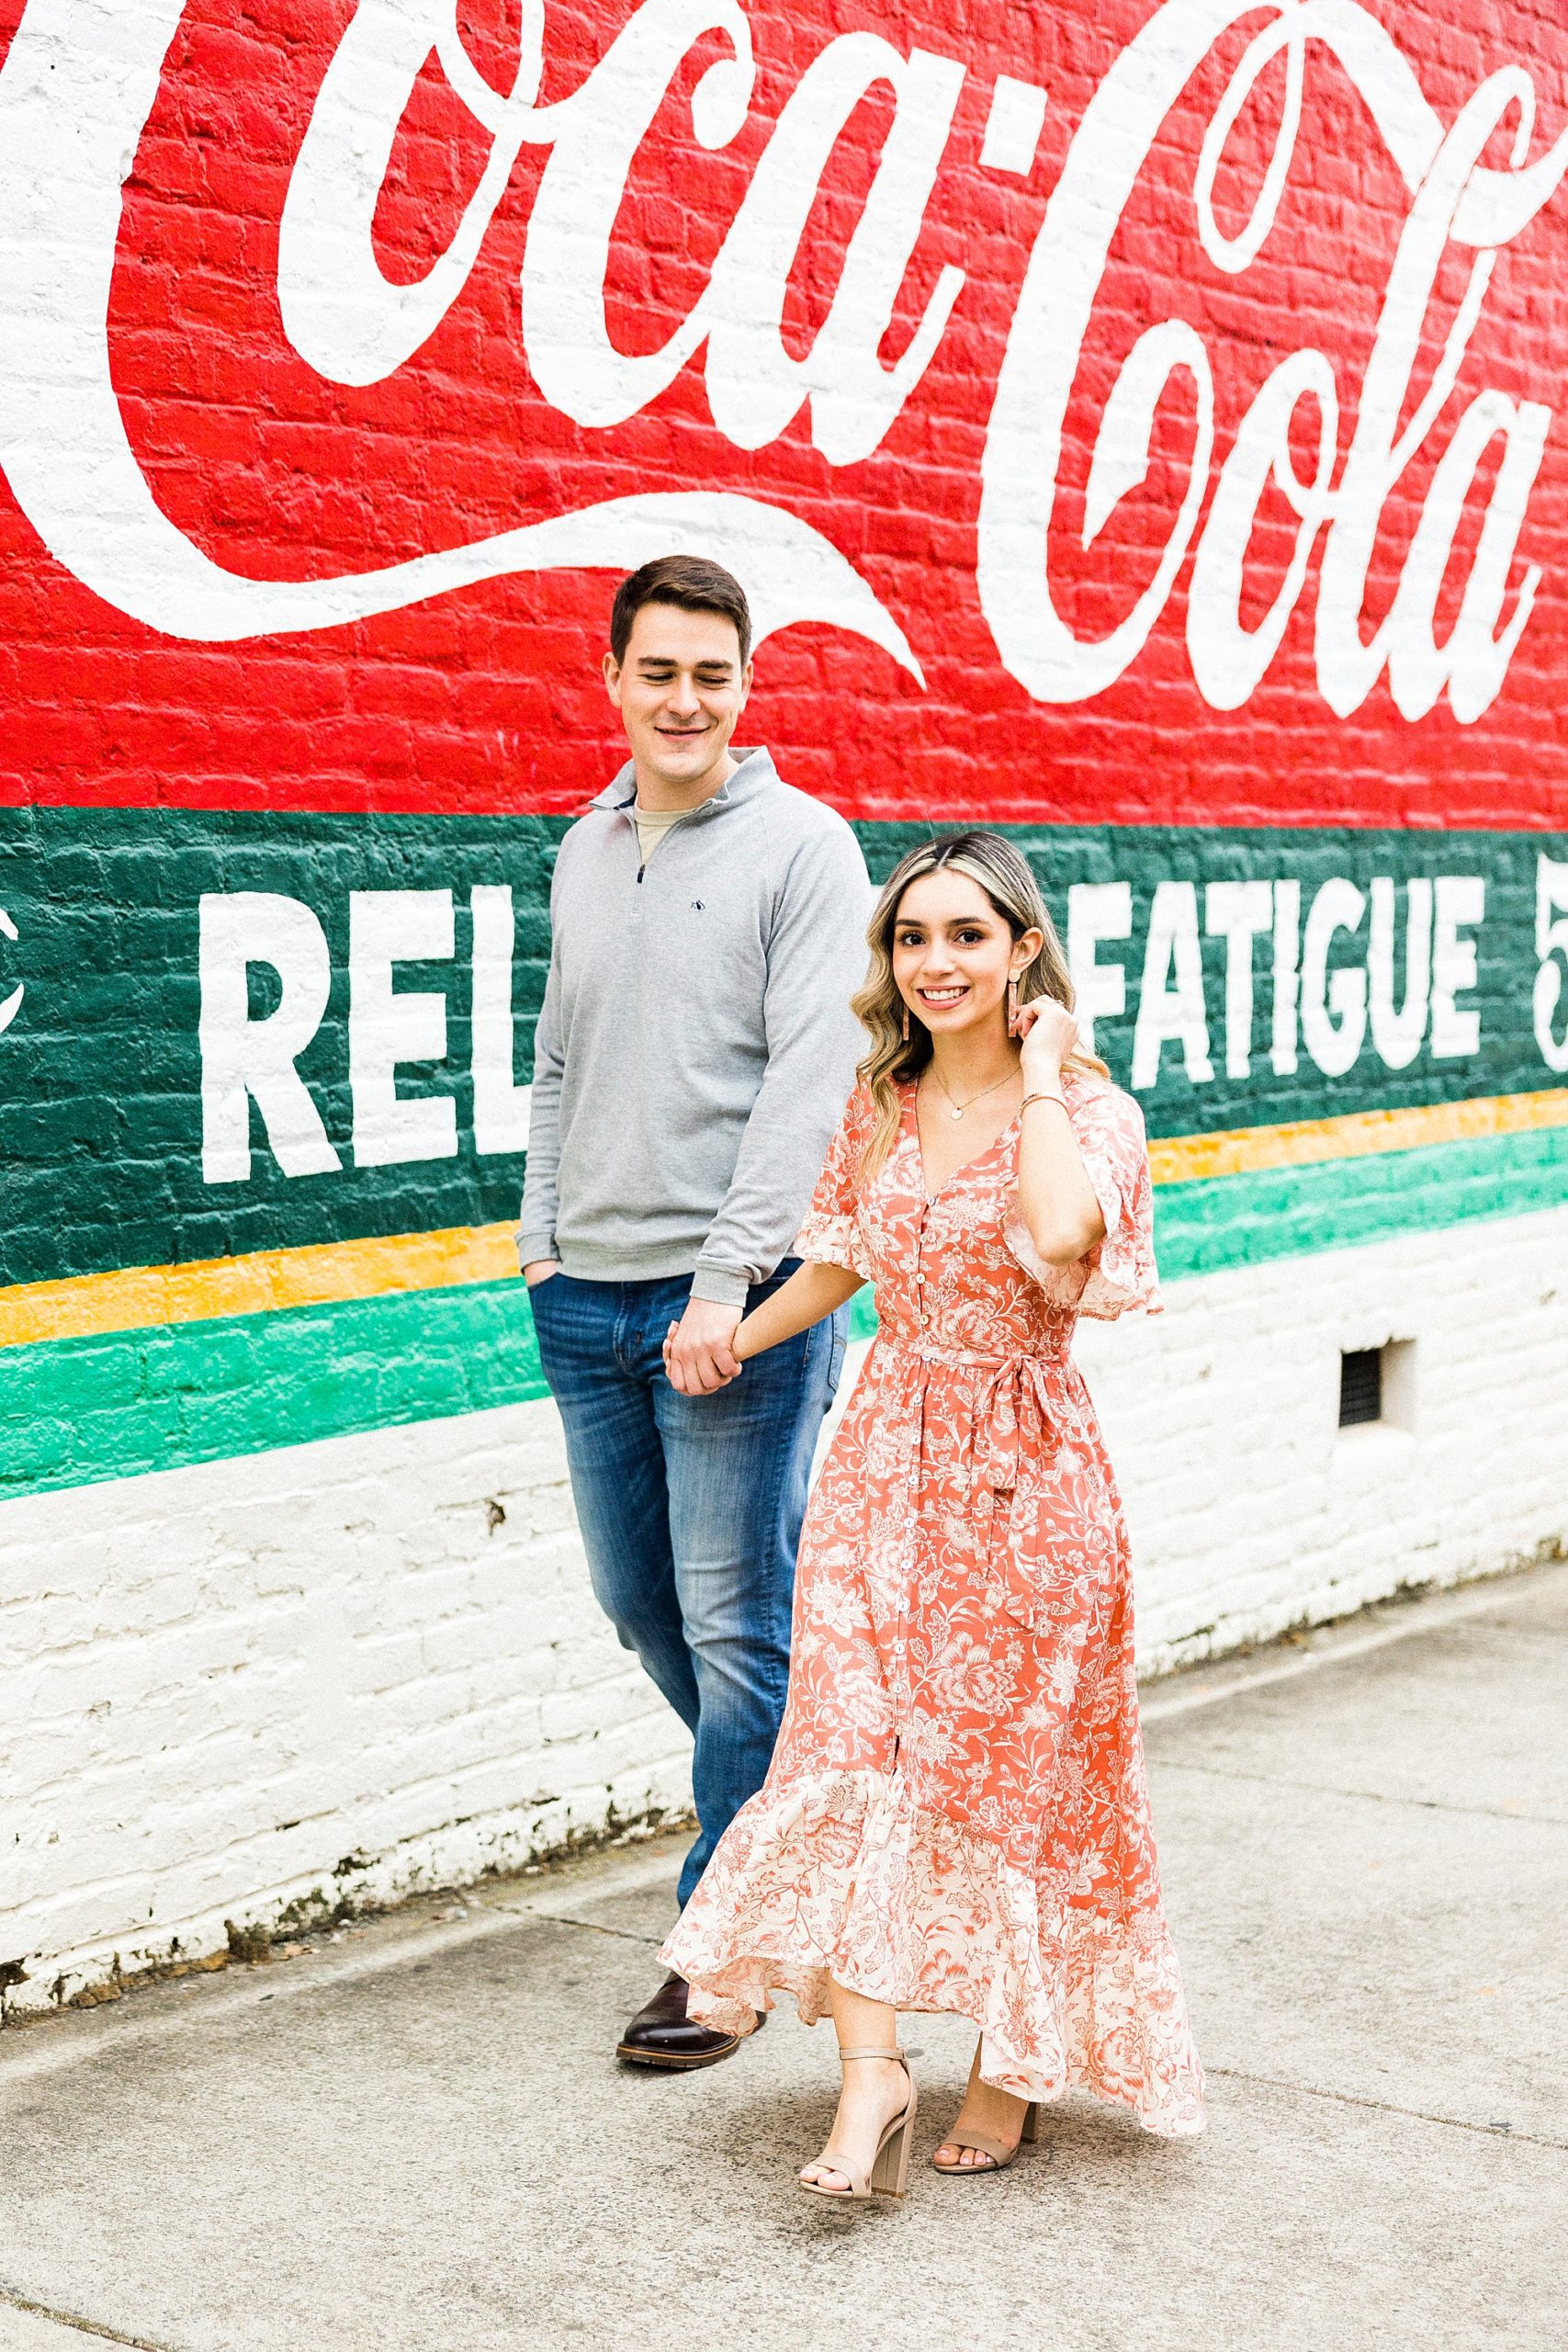 engaged couple walks by Coca-Cola mural during Downtown Concord engagement session